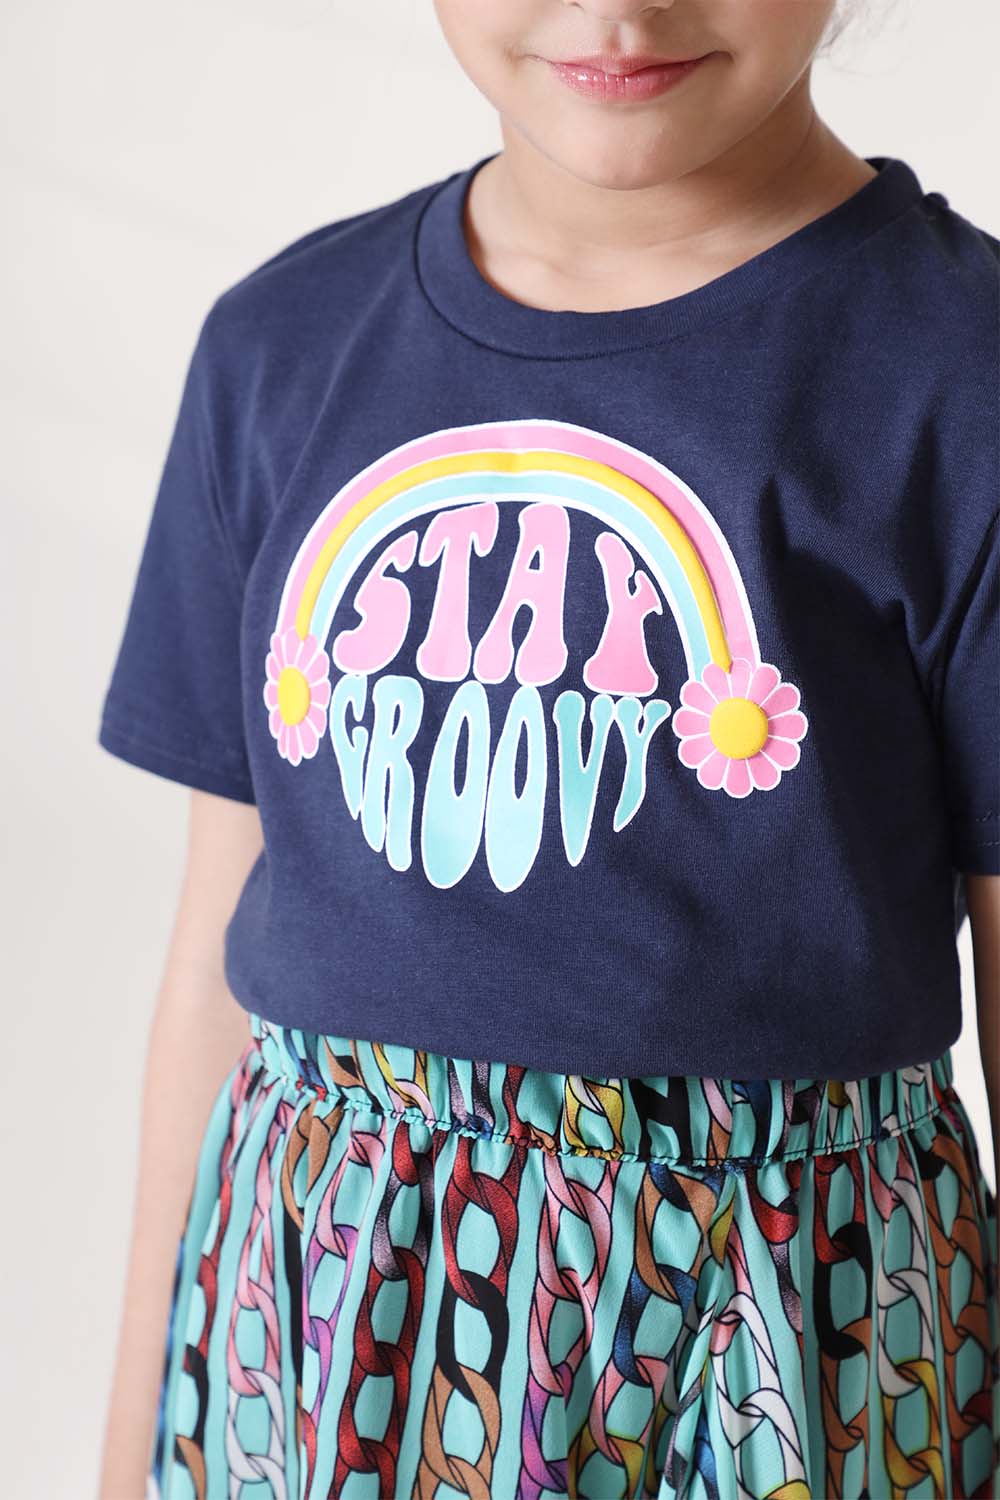 Hope Not Out by Shahid Afridi Girls Knit T-Shirt Stay Groovy: Girls' Blue Half Sleeve Tee with Graphic Print